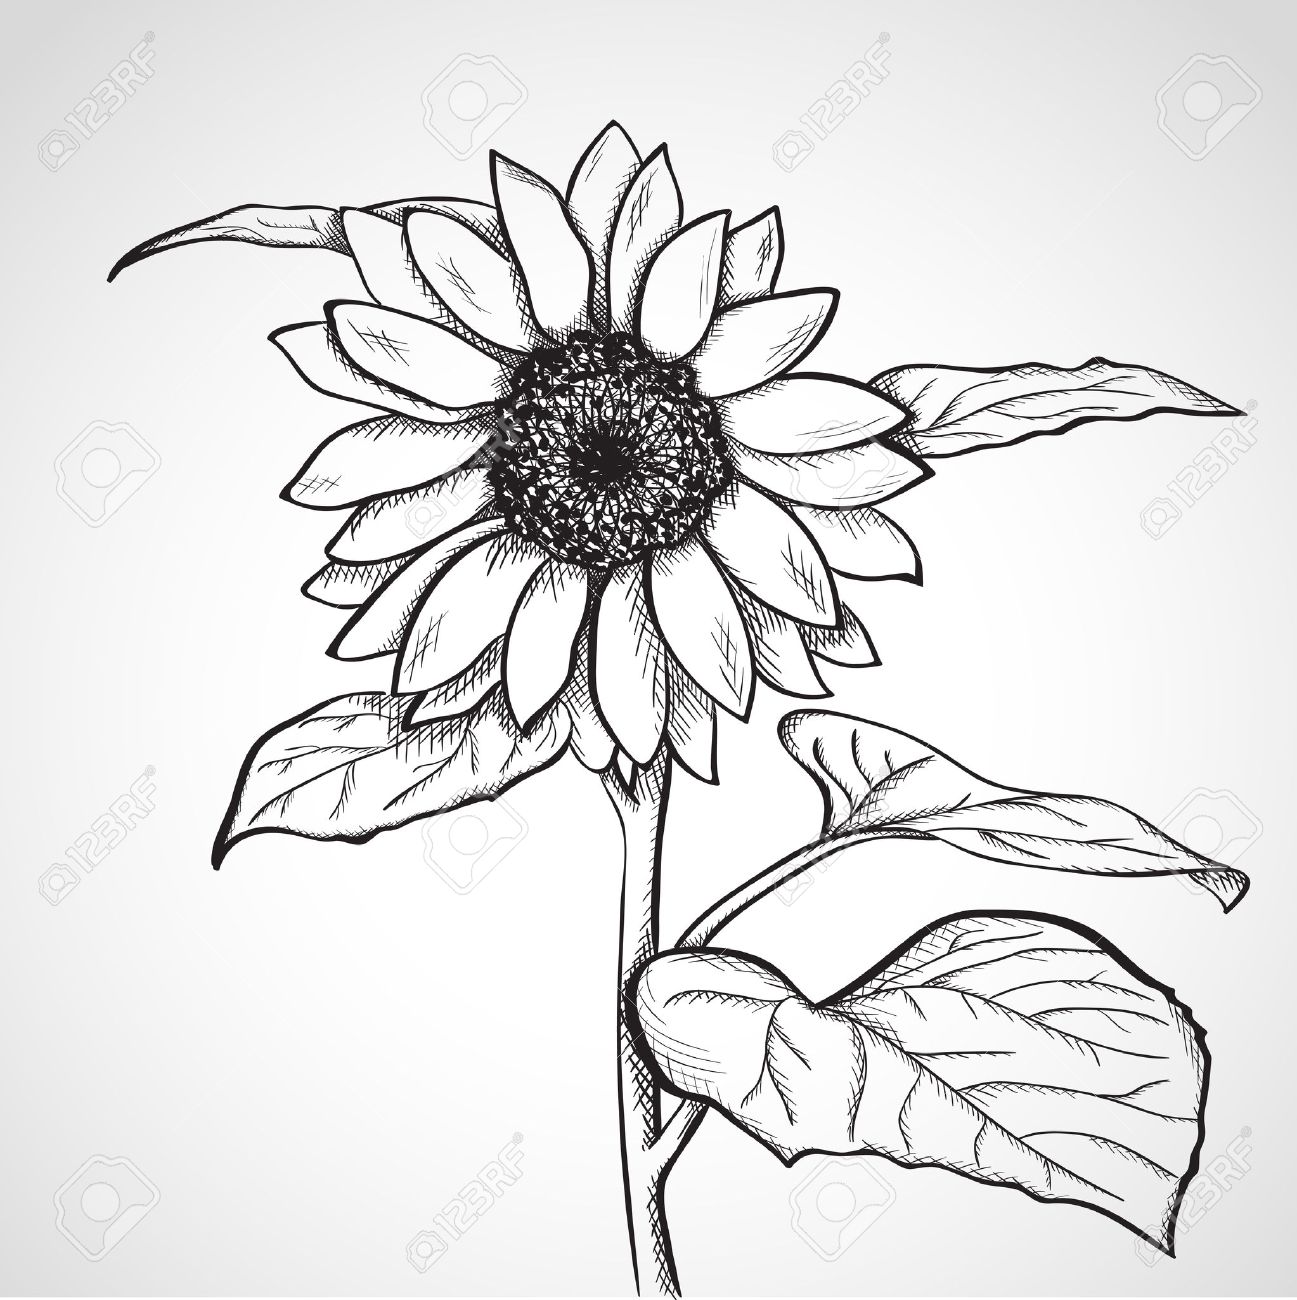 Sunflower Drawing Images Free at GetDrawings Free download